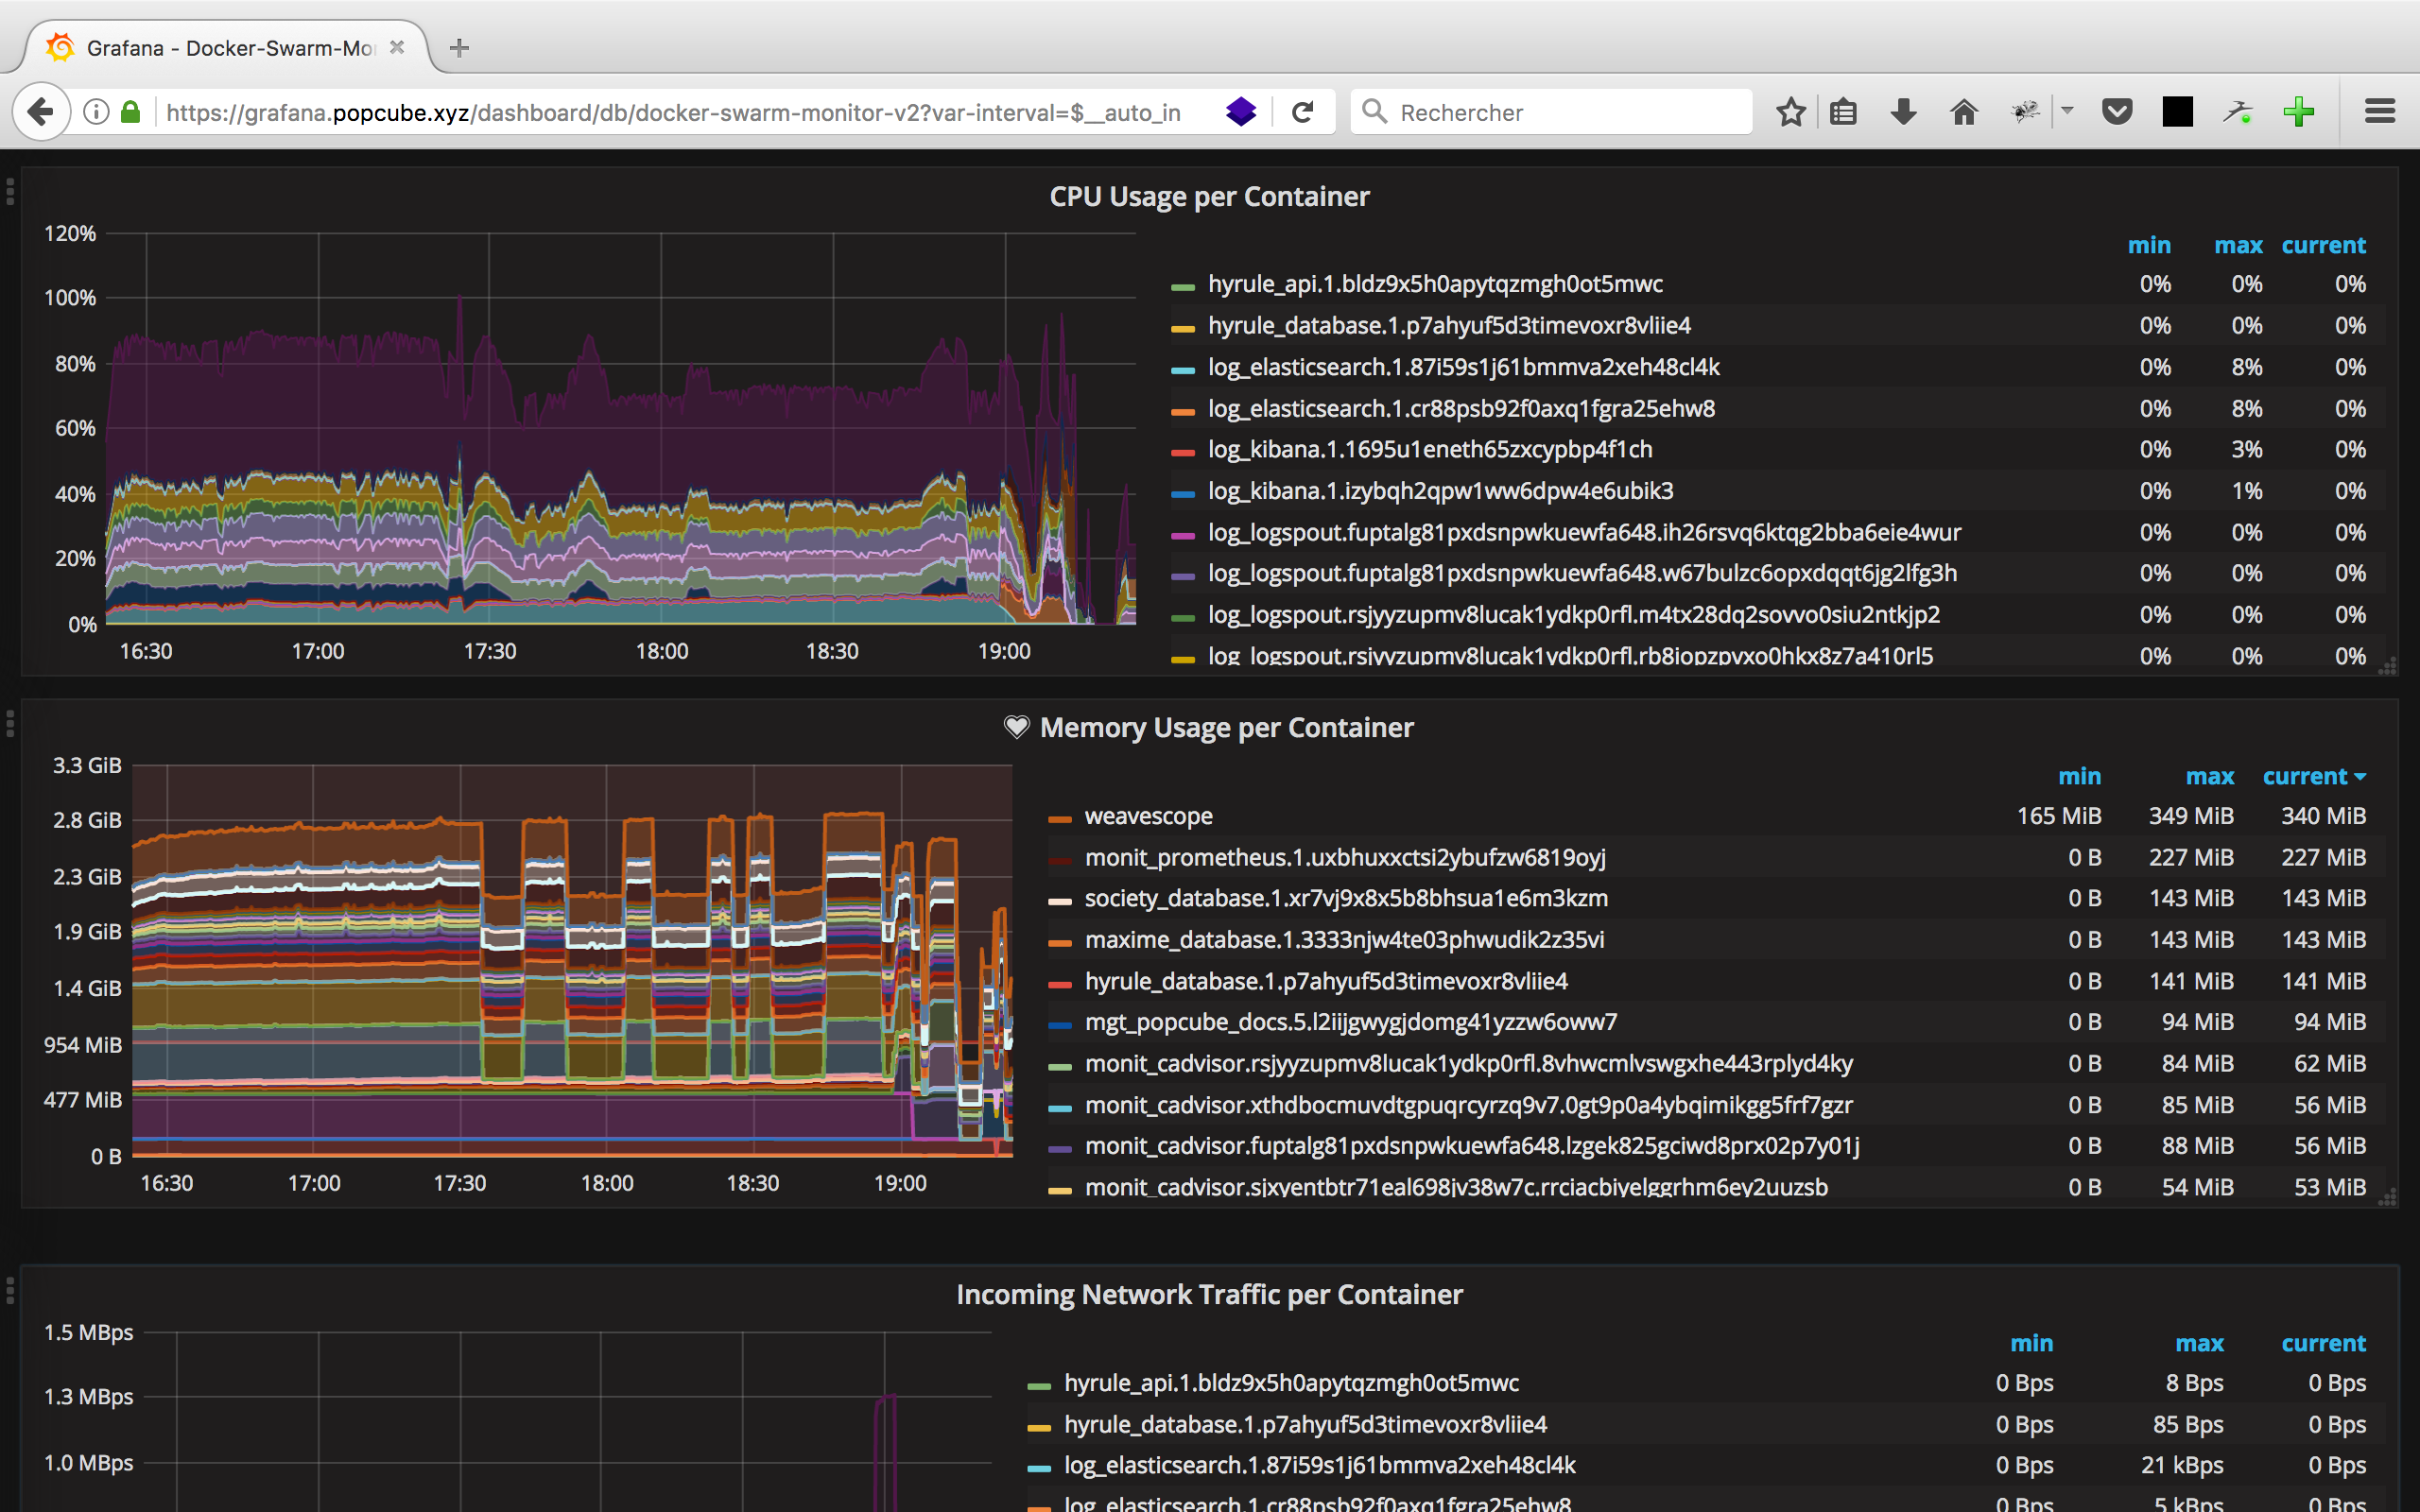 infrastructure/../../_static/infrastructure/monit/grafana_3.png